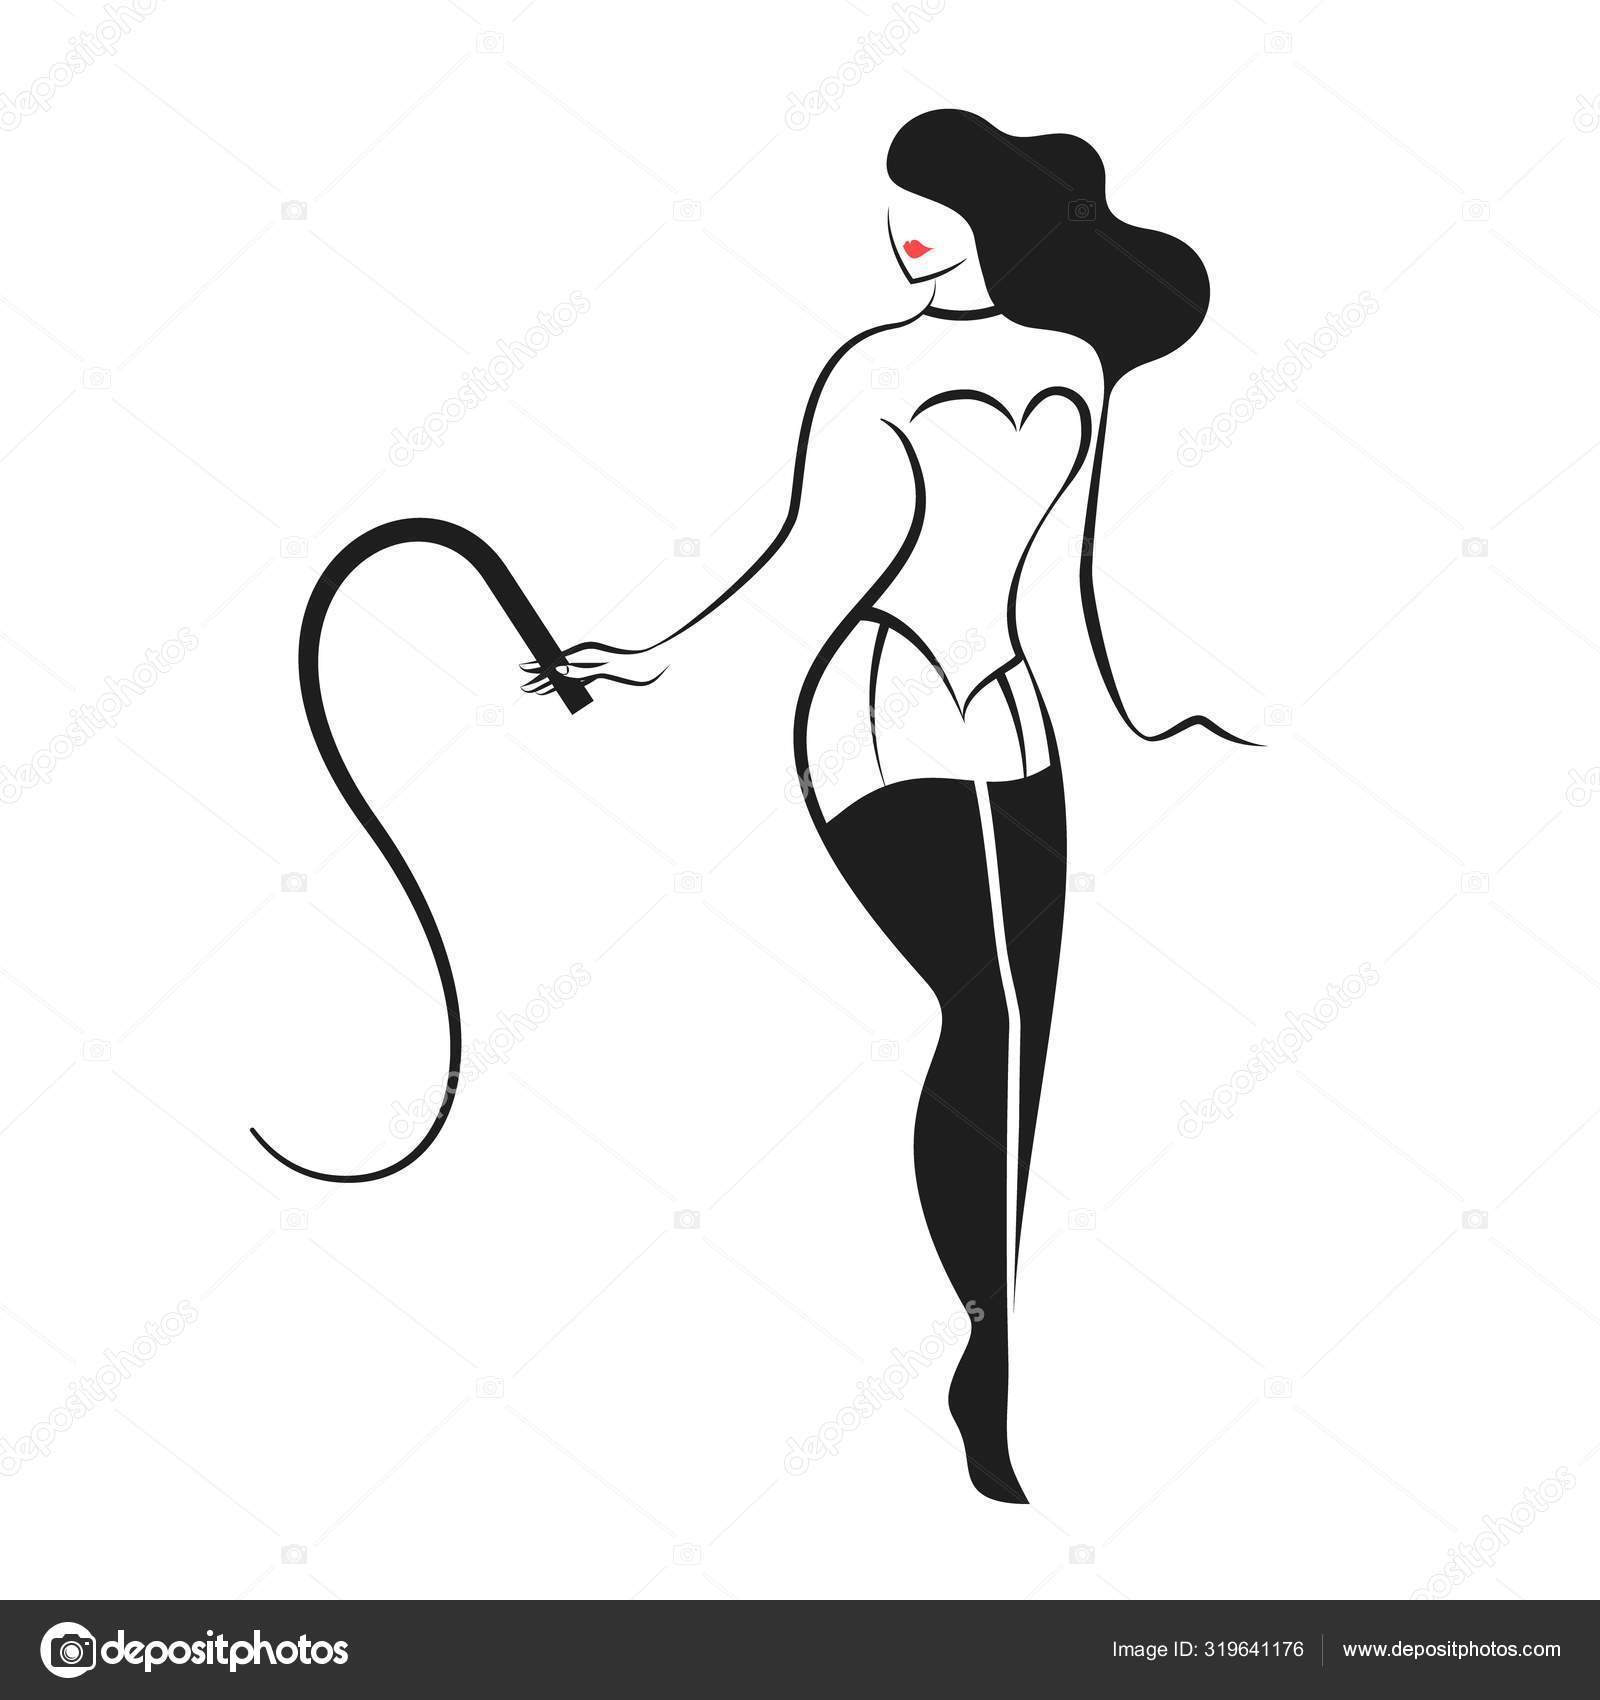 depositphotos_319641176-stock-illustration-sexy-woman-with-a-whip.jpg